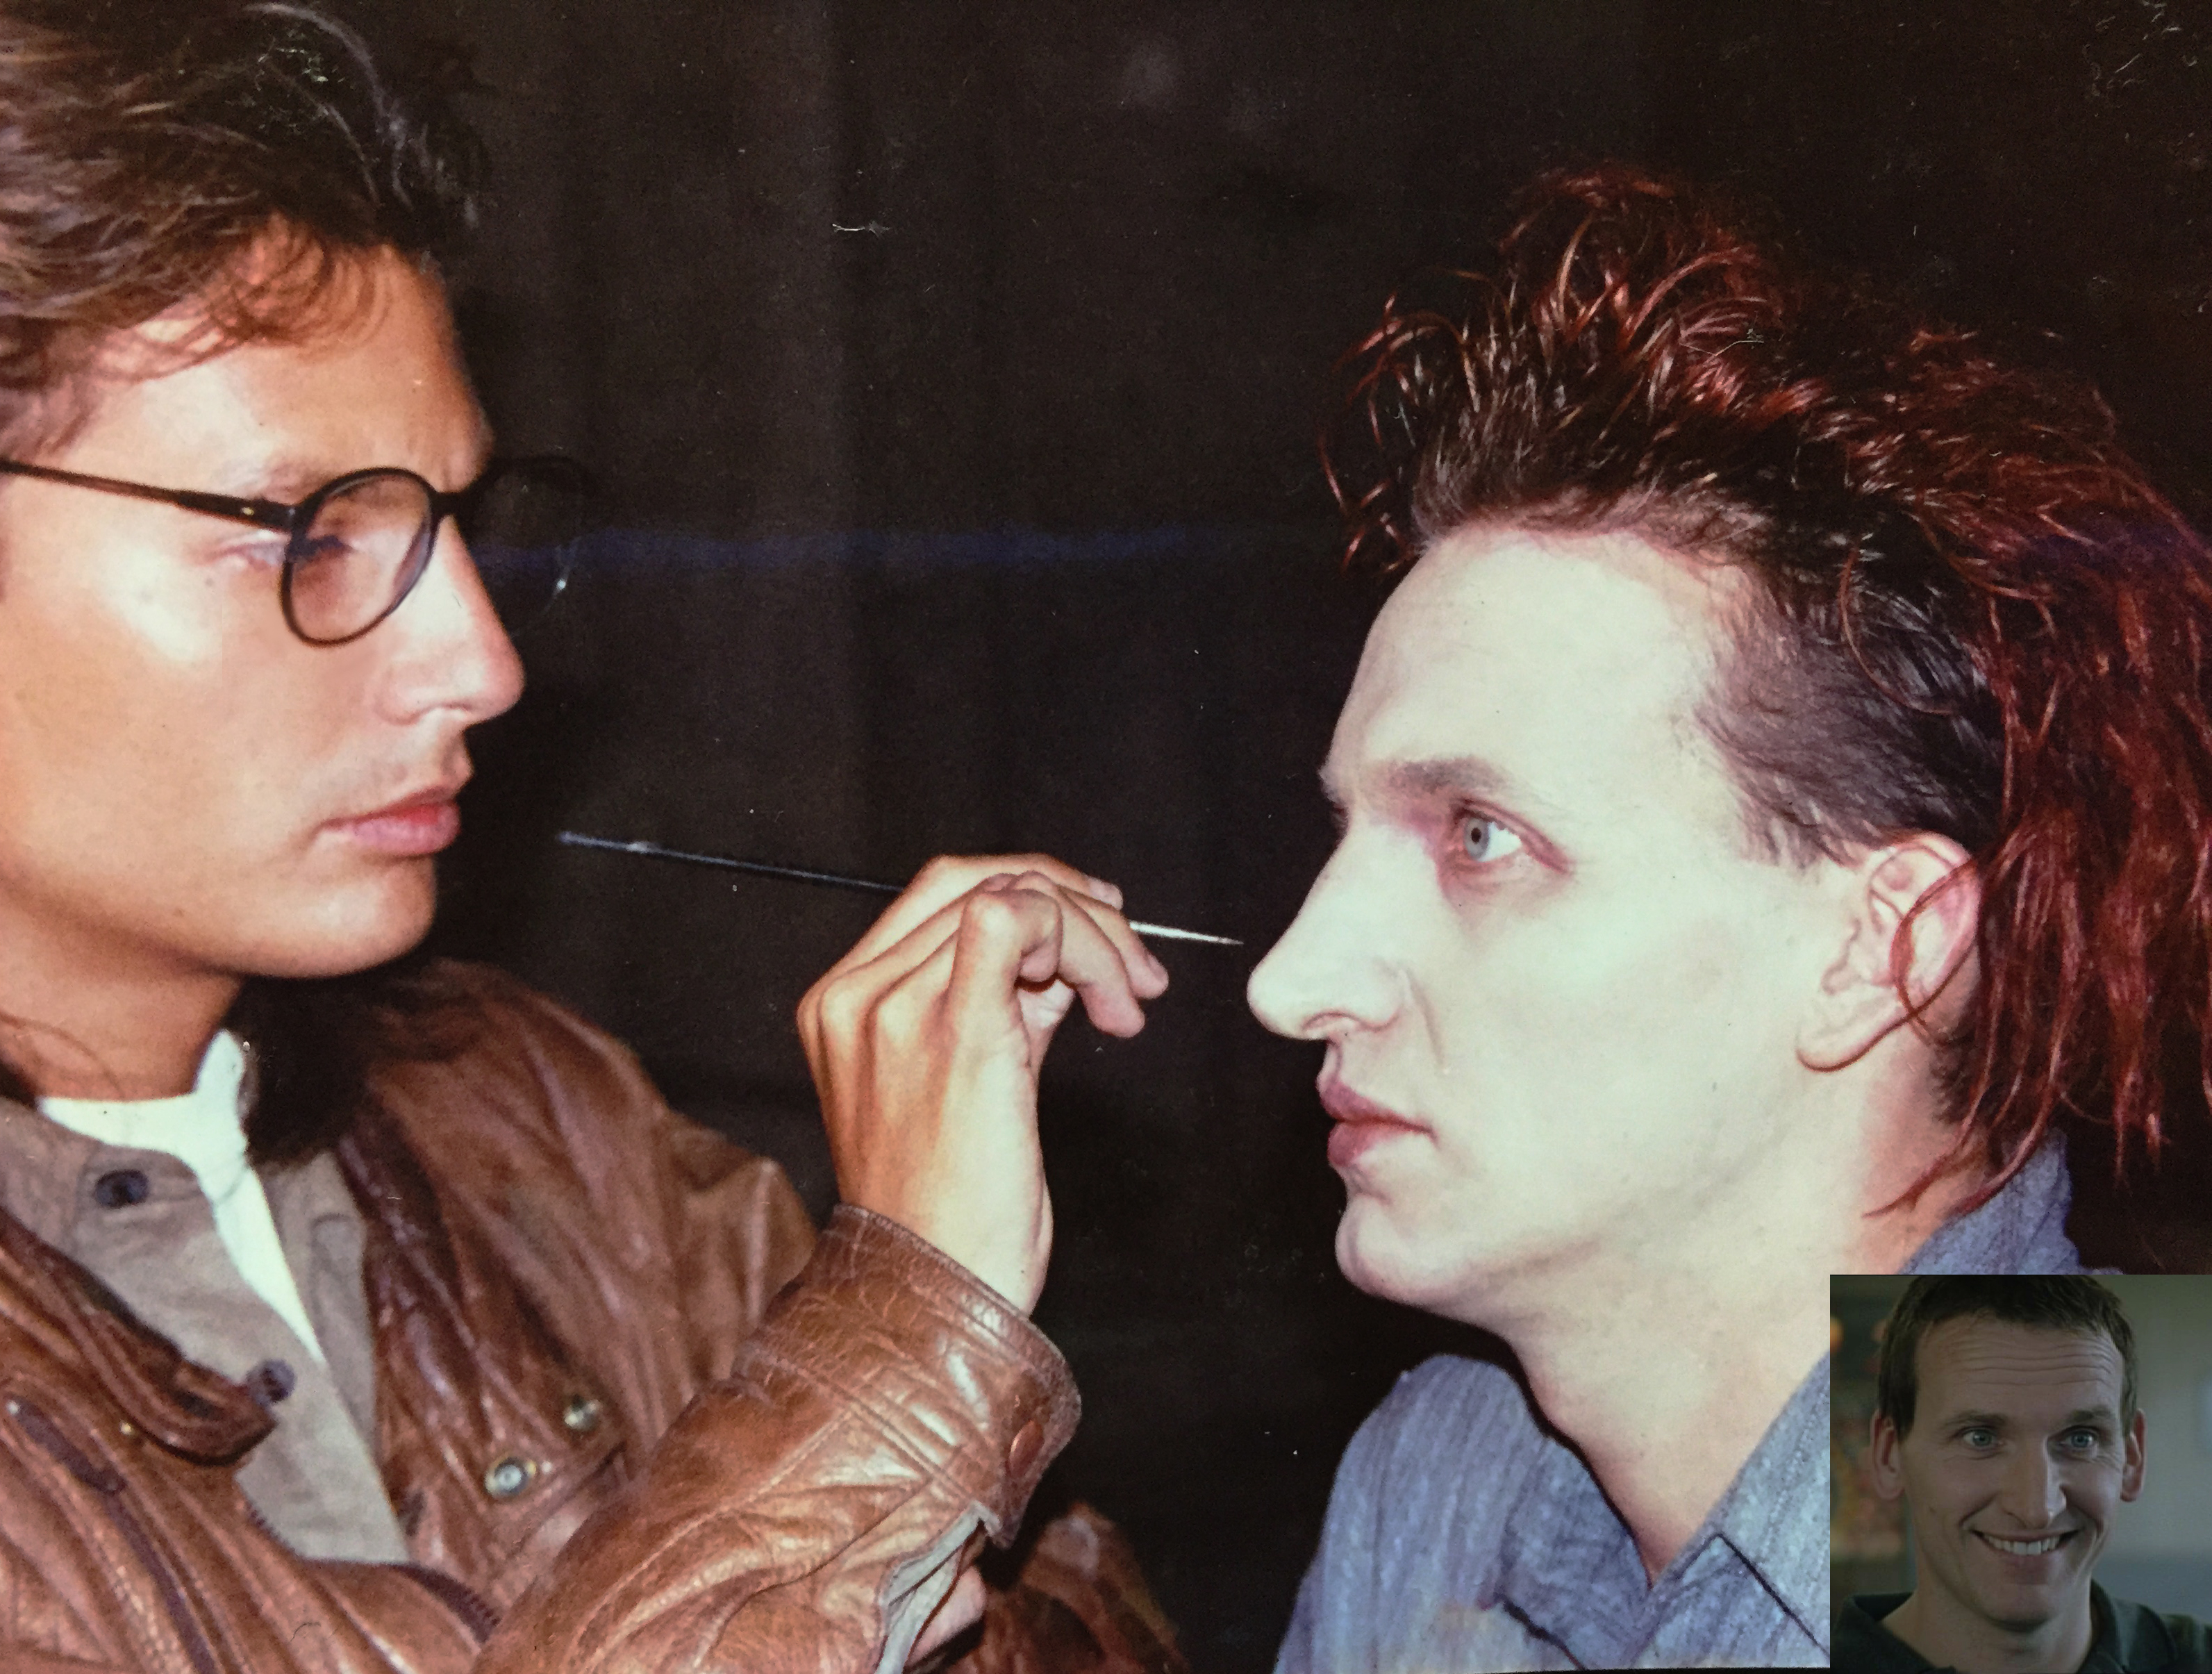 Applying prosthetic pieces to Christopher Eccleston for The Death and The Compass. Makeup by Gabriel Solana.